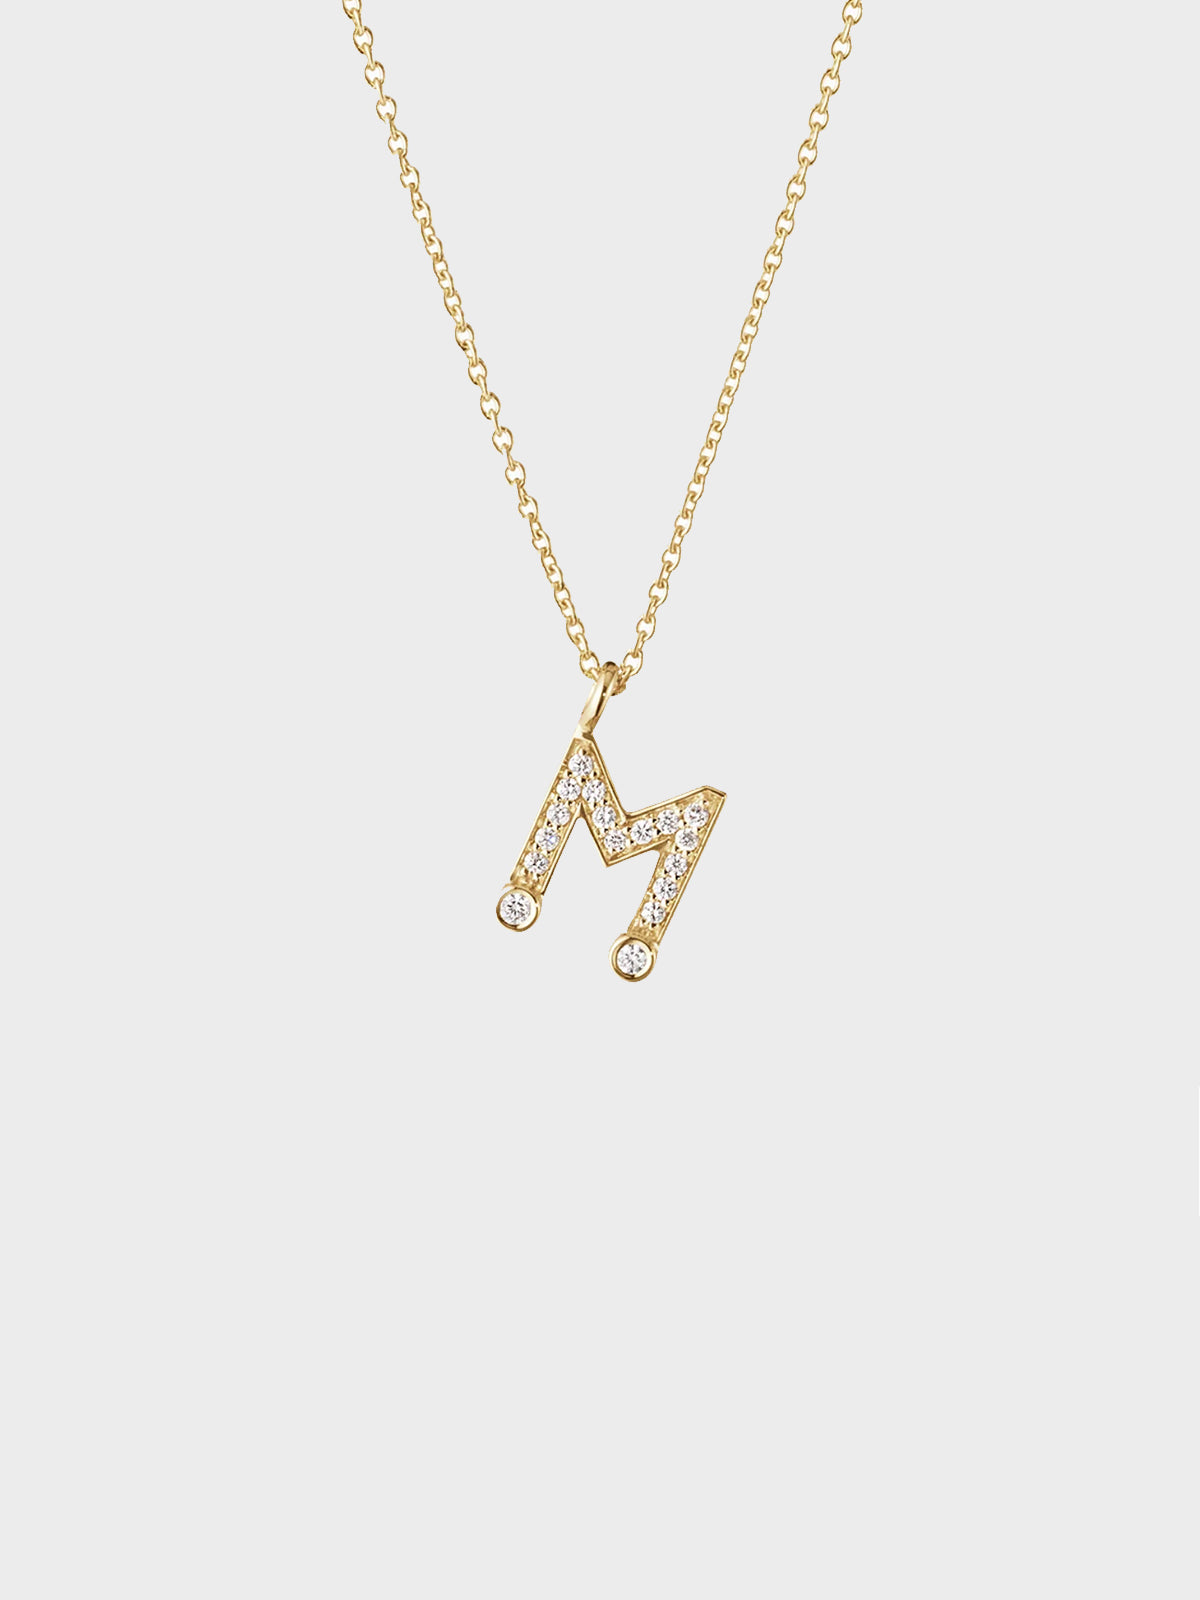 Sophie Bille Brahe - Simple M Necklace in 18K Yellow Gold